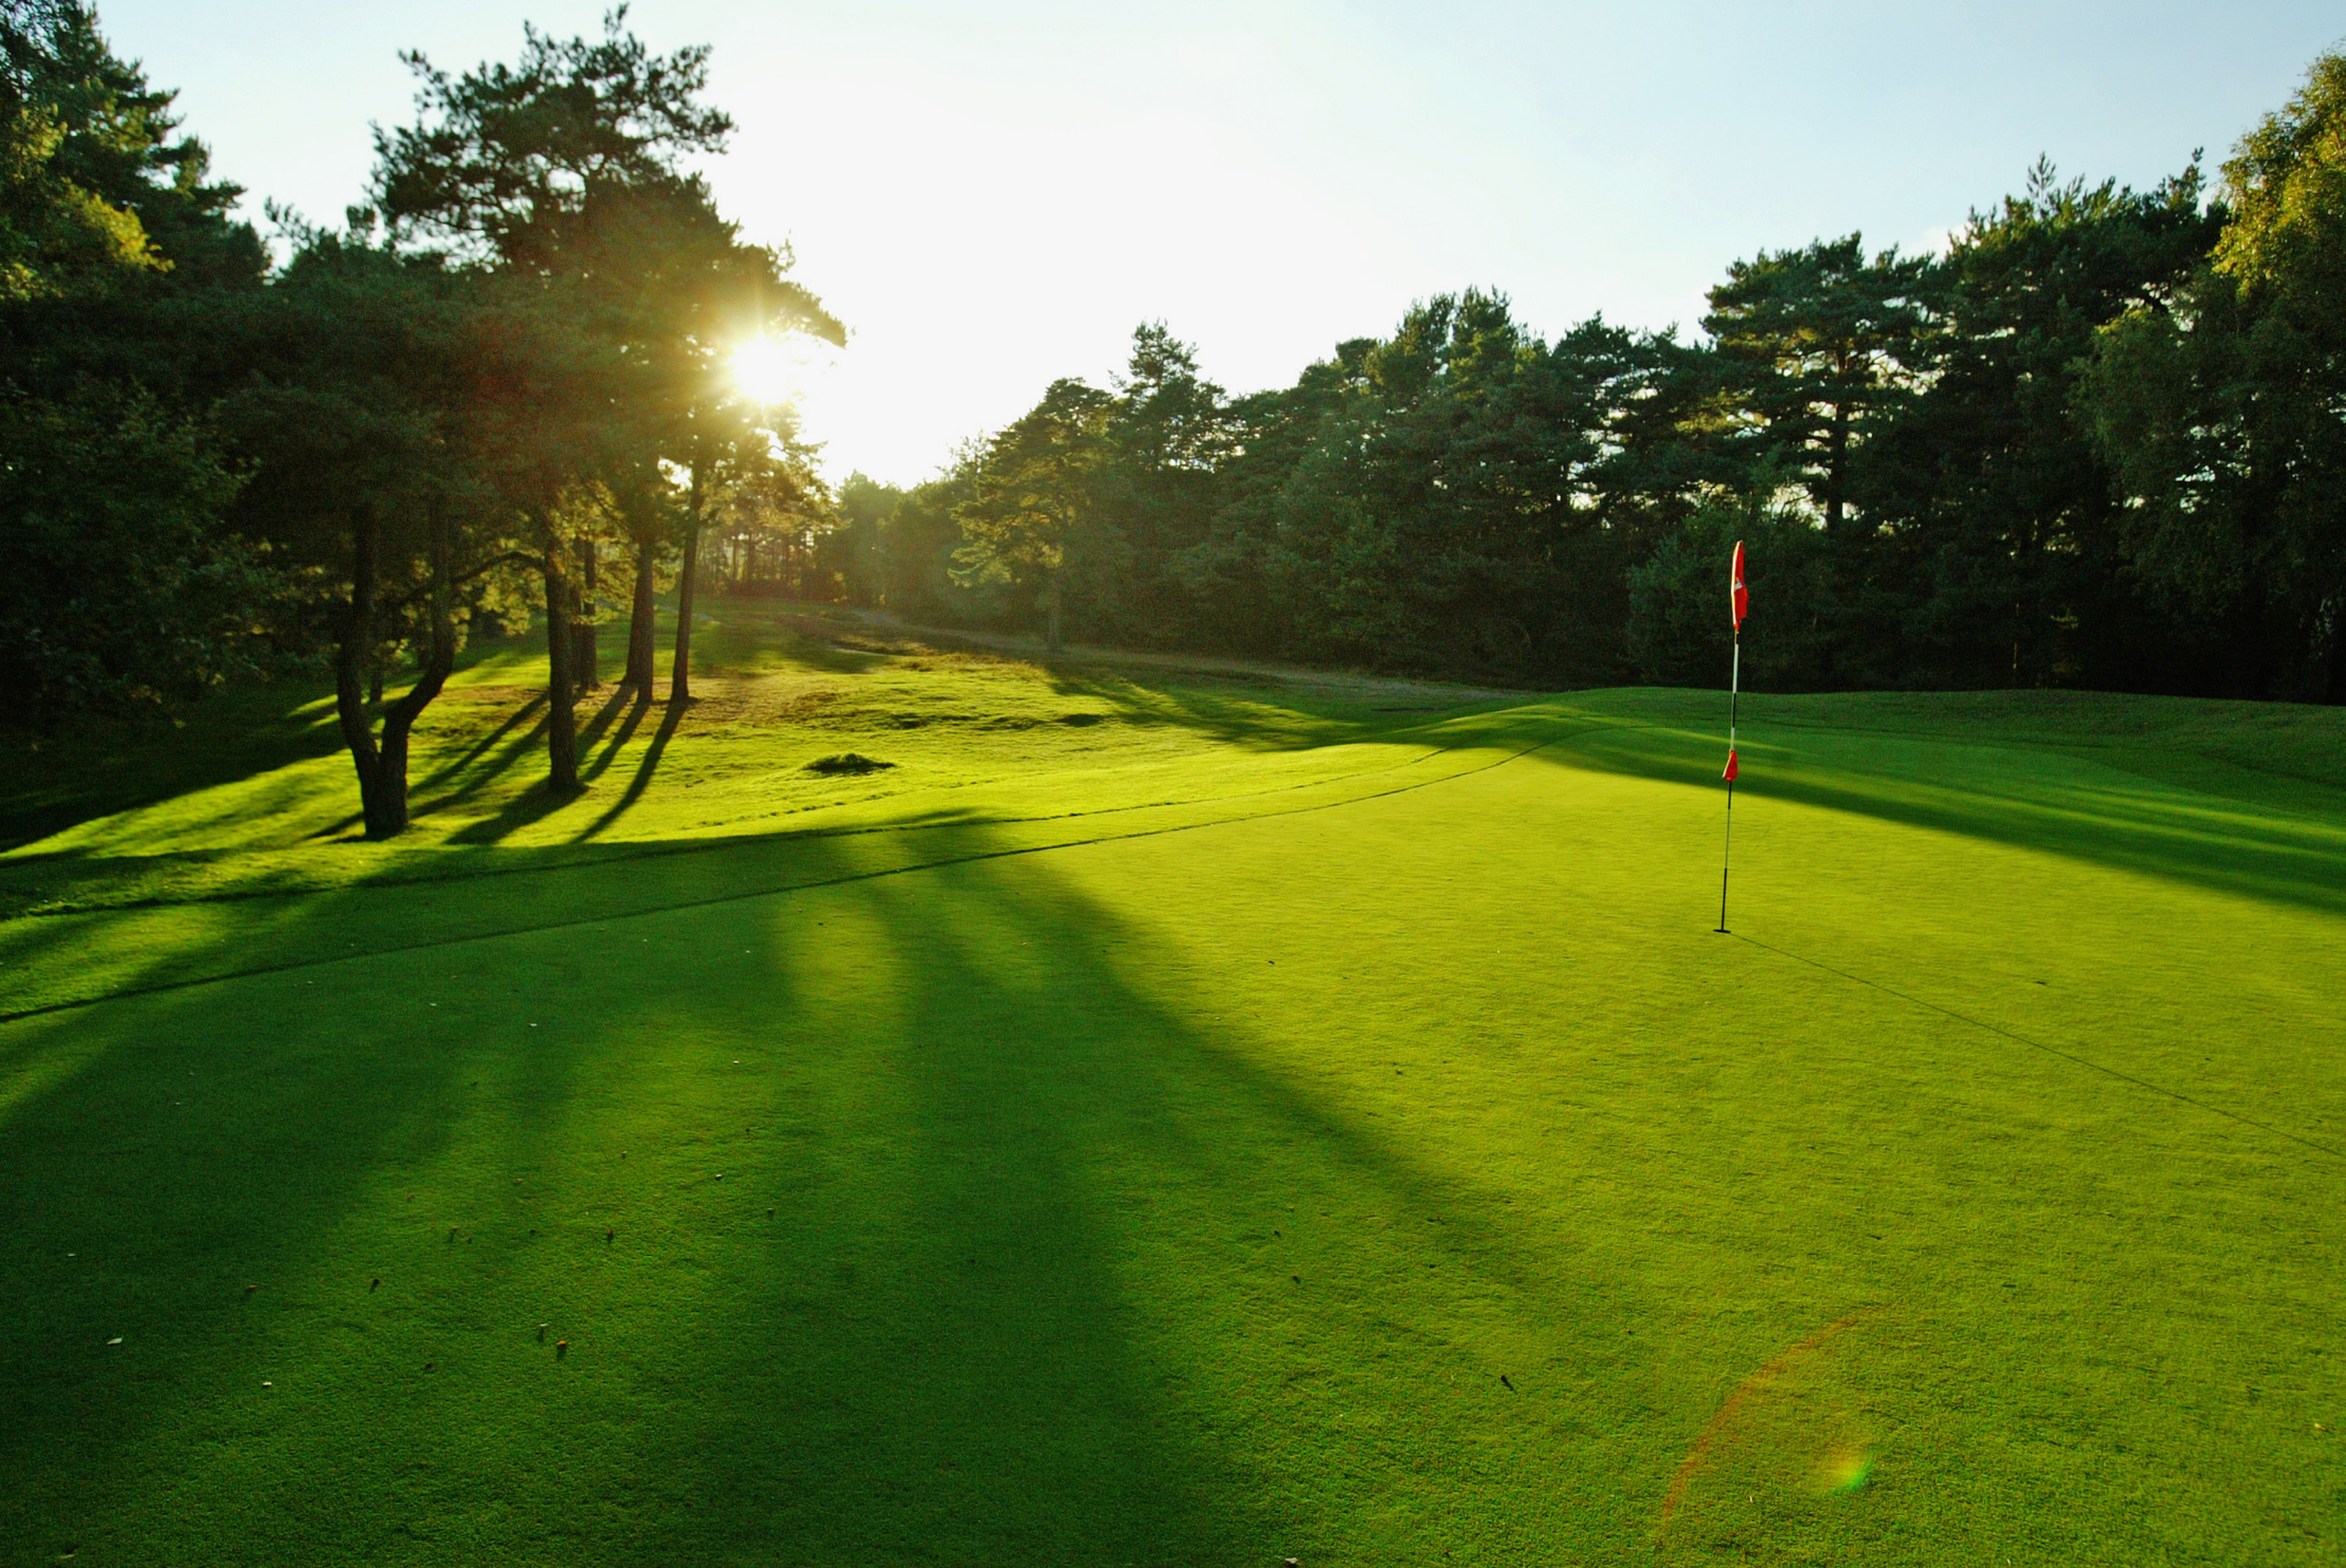 Different Kinds of Grass on Golf Courses - SportsRec